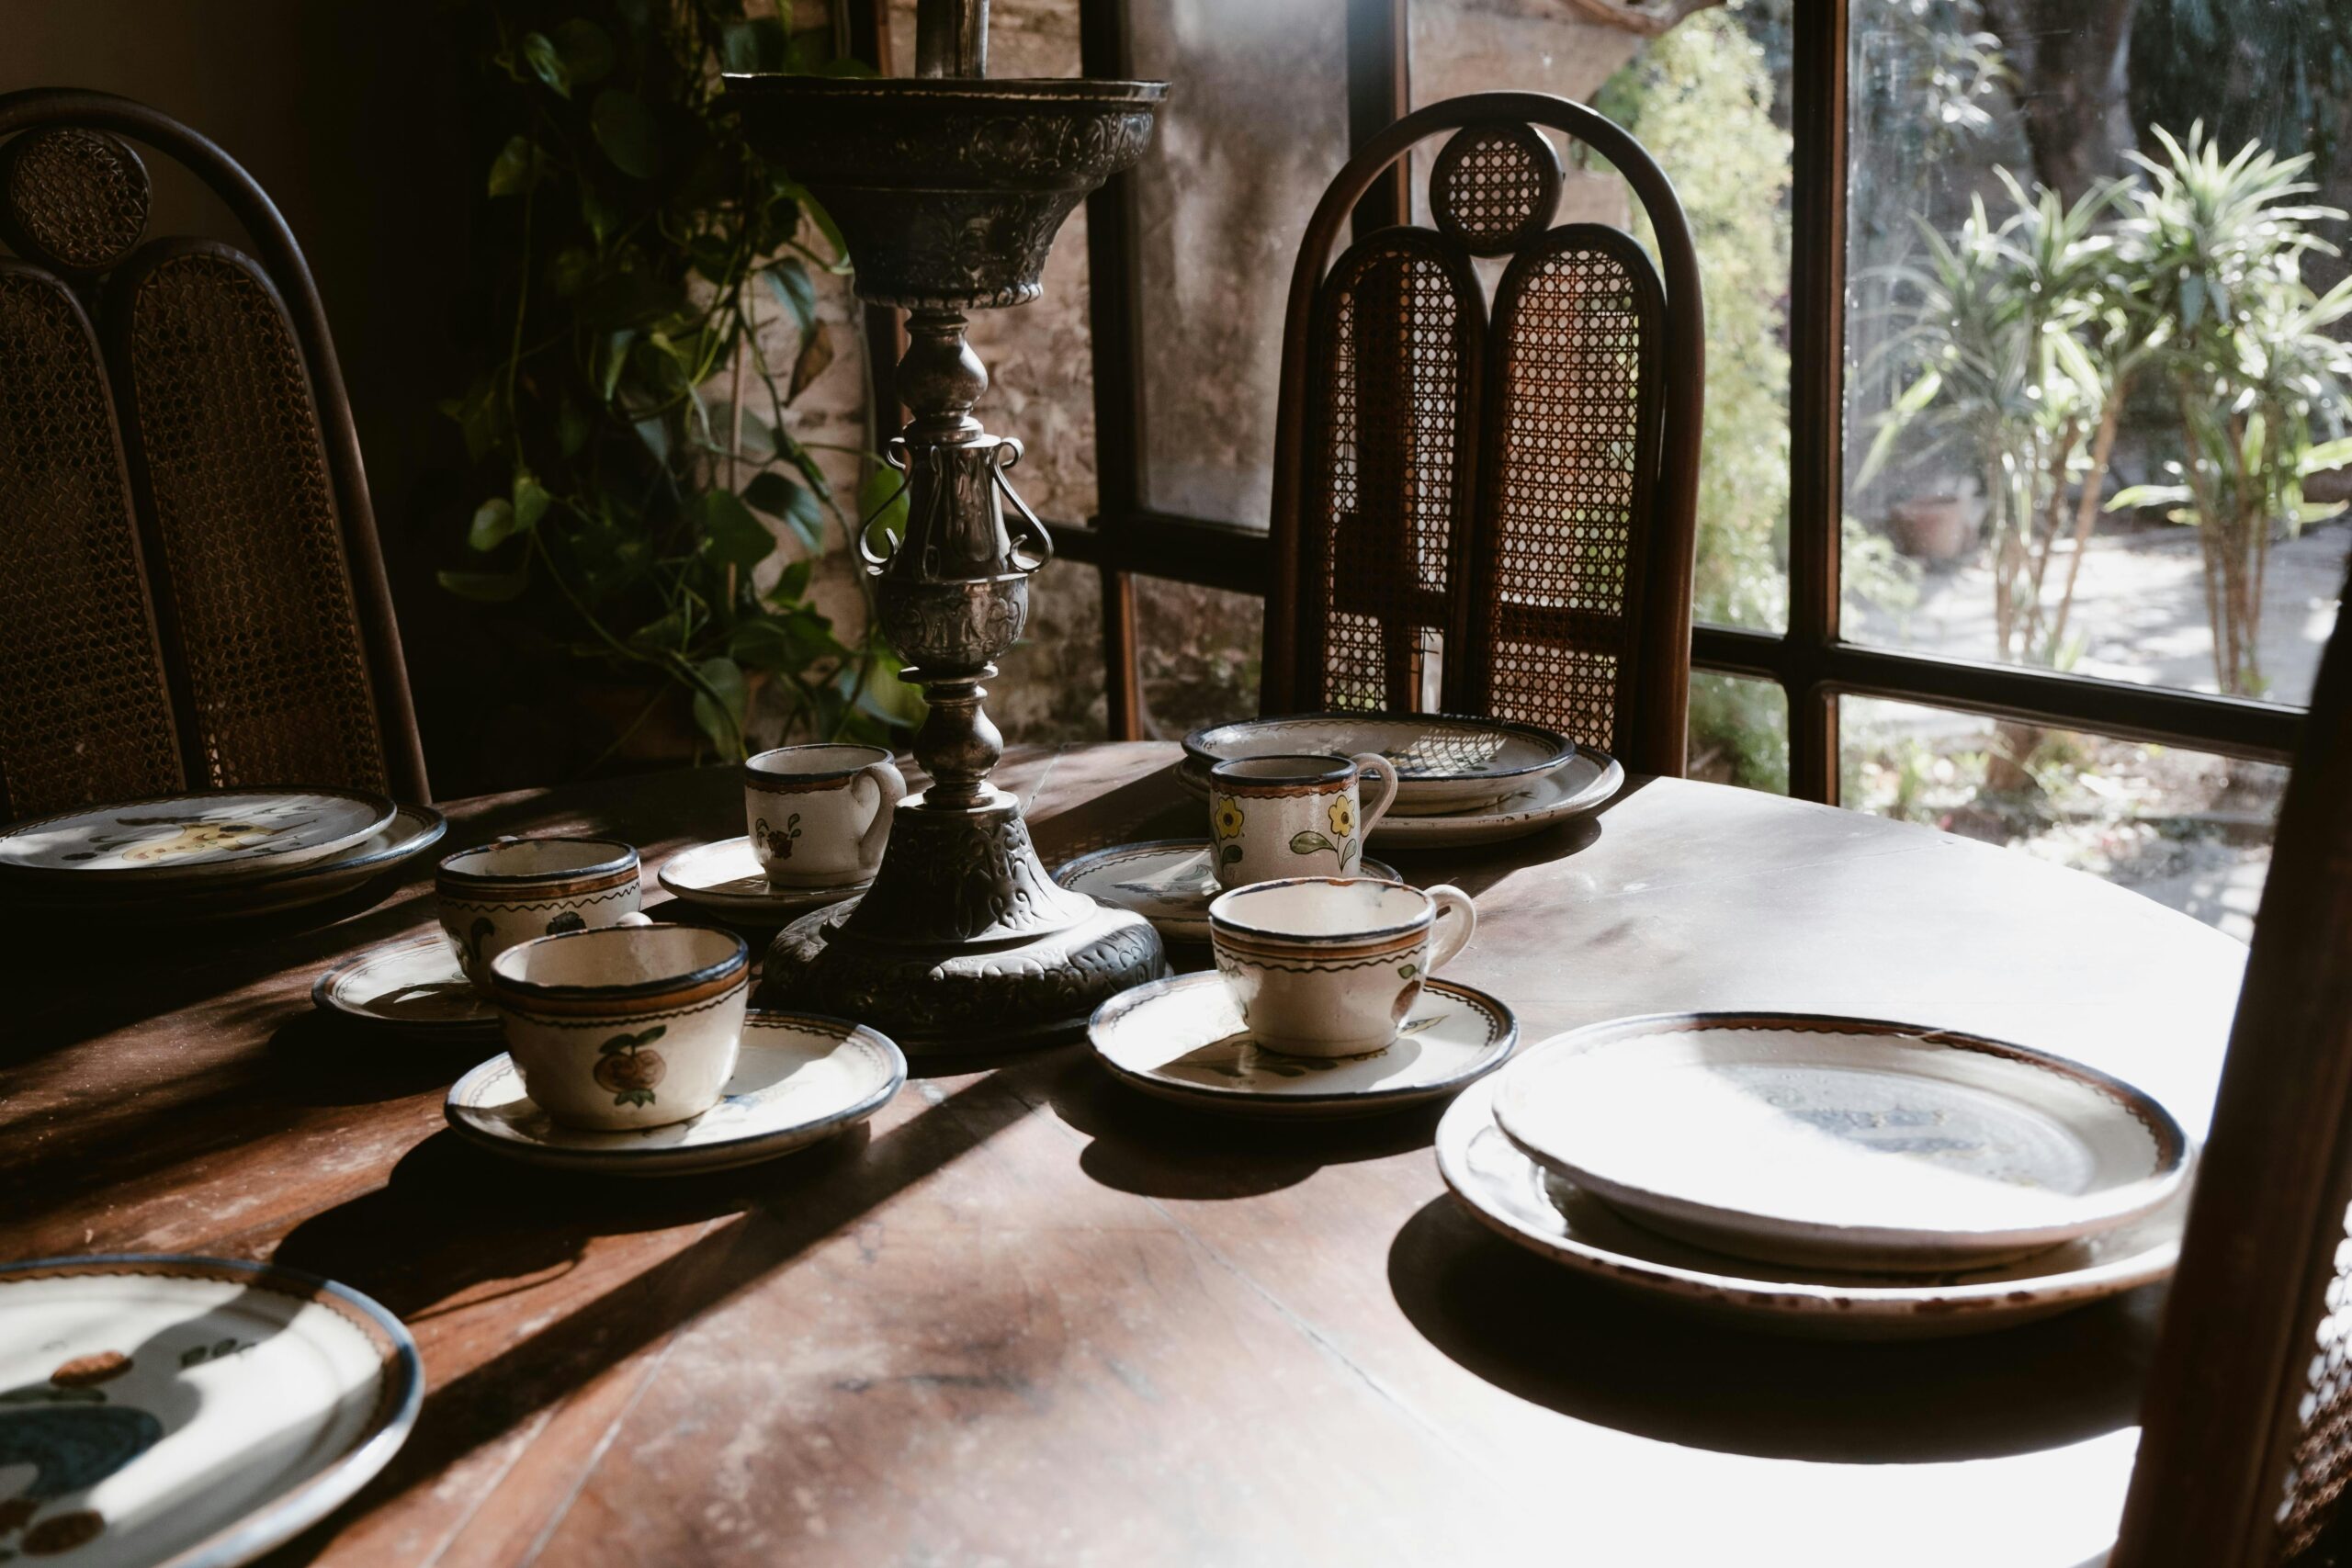 Vintage tea cups and plates set on a wooden table by a sunlit window overlooking greenery.